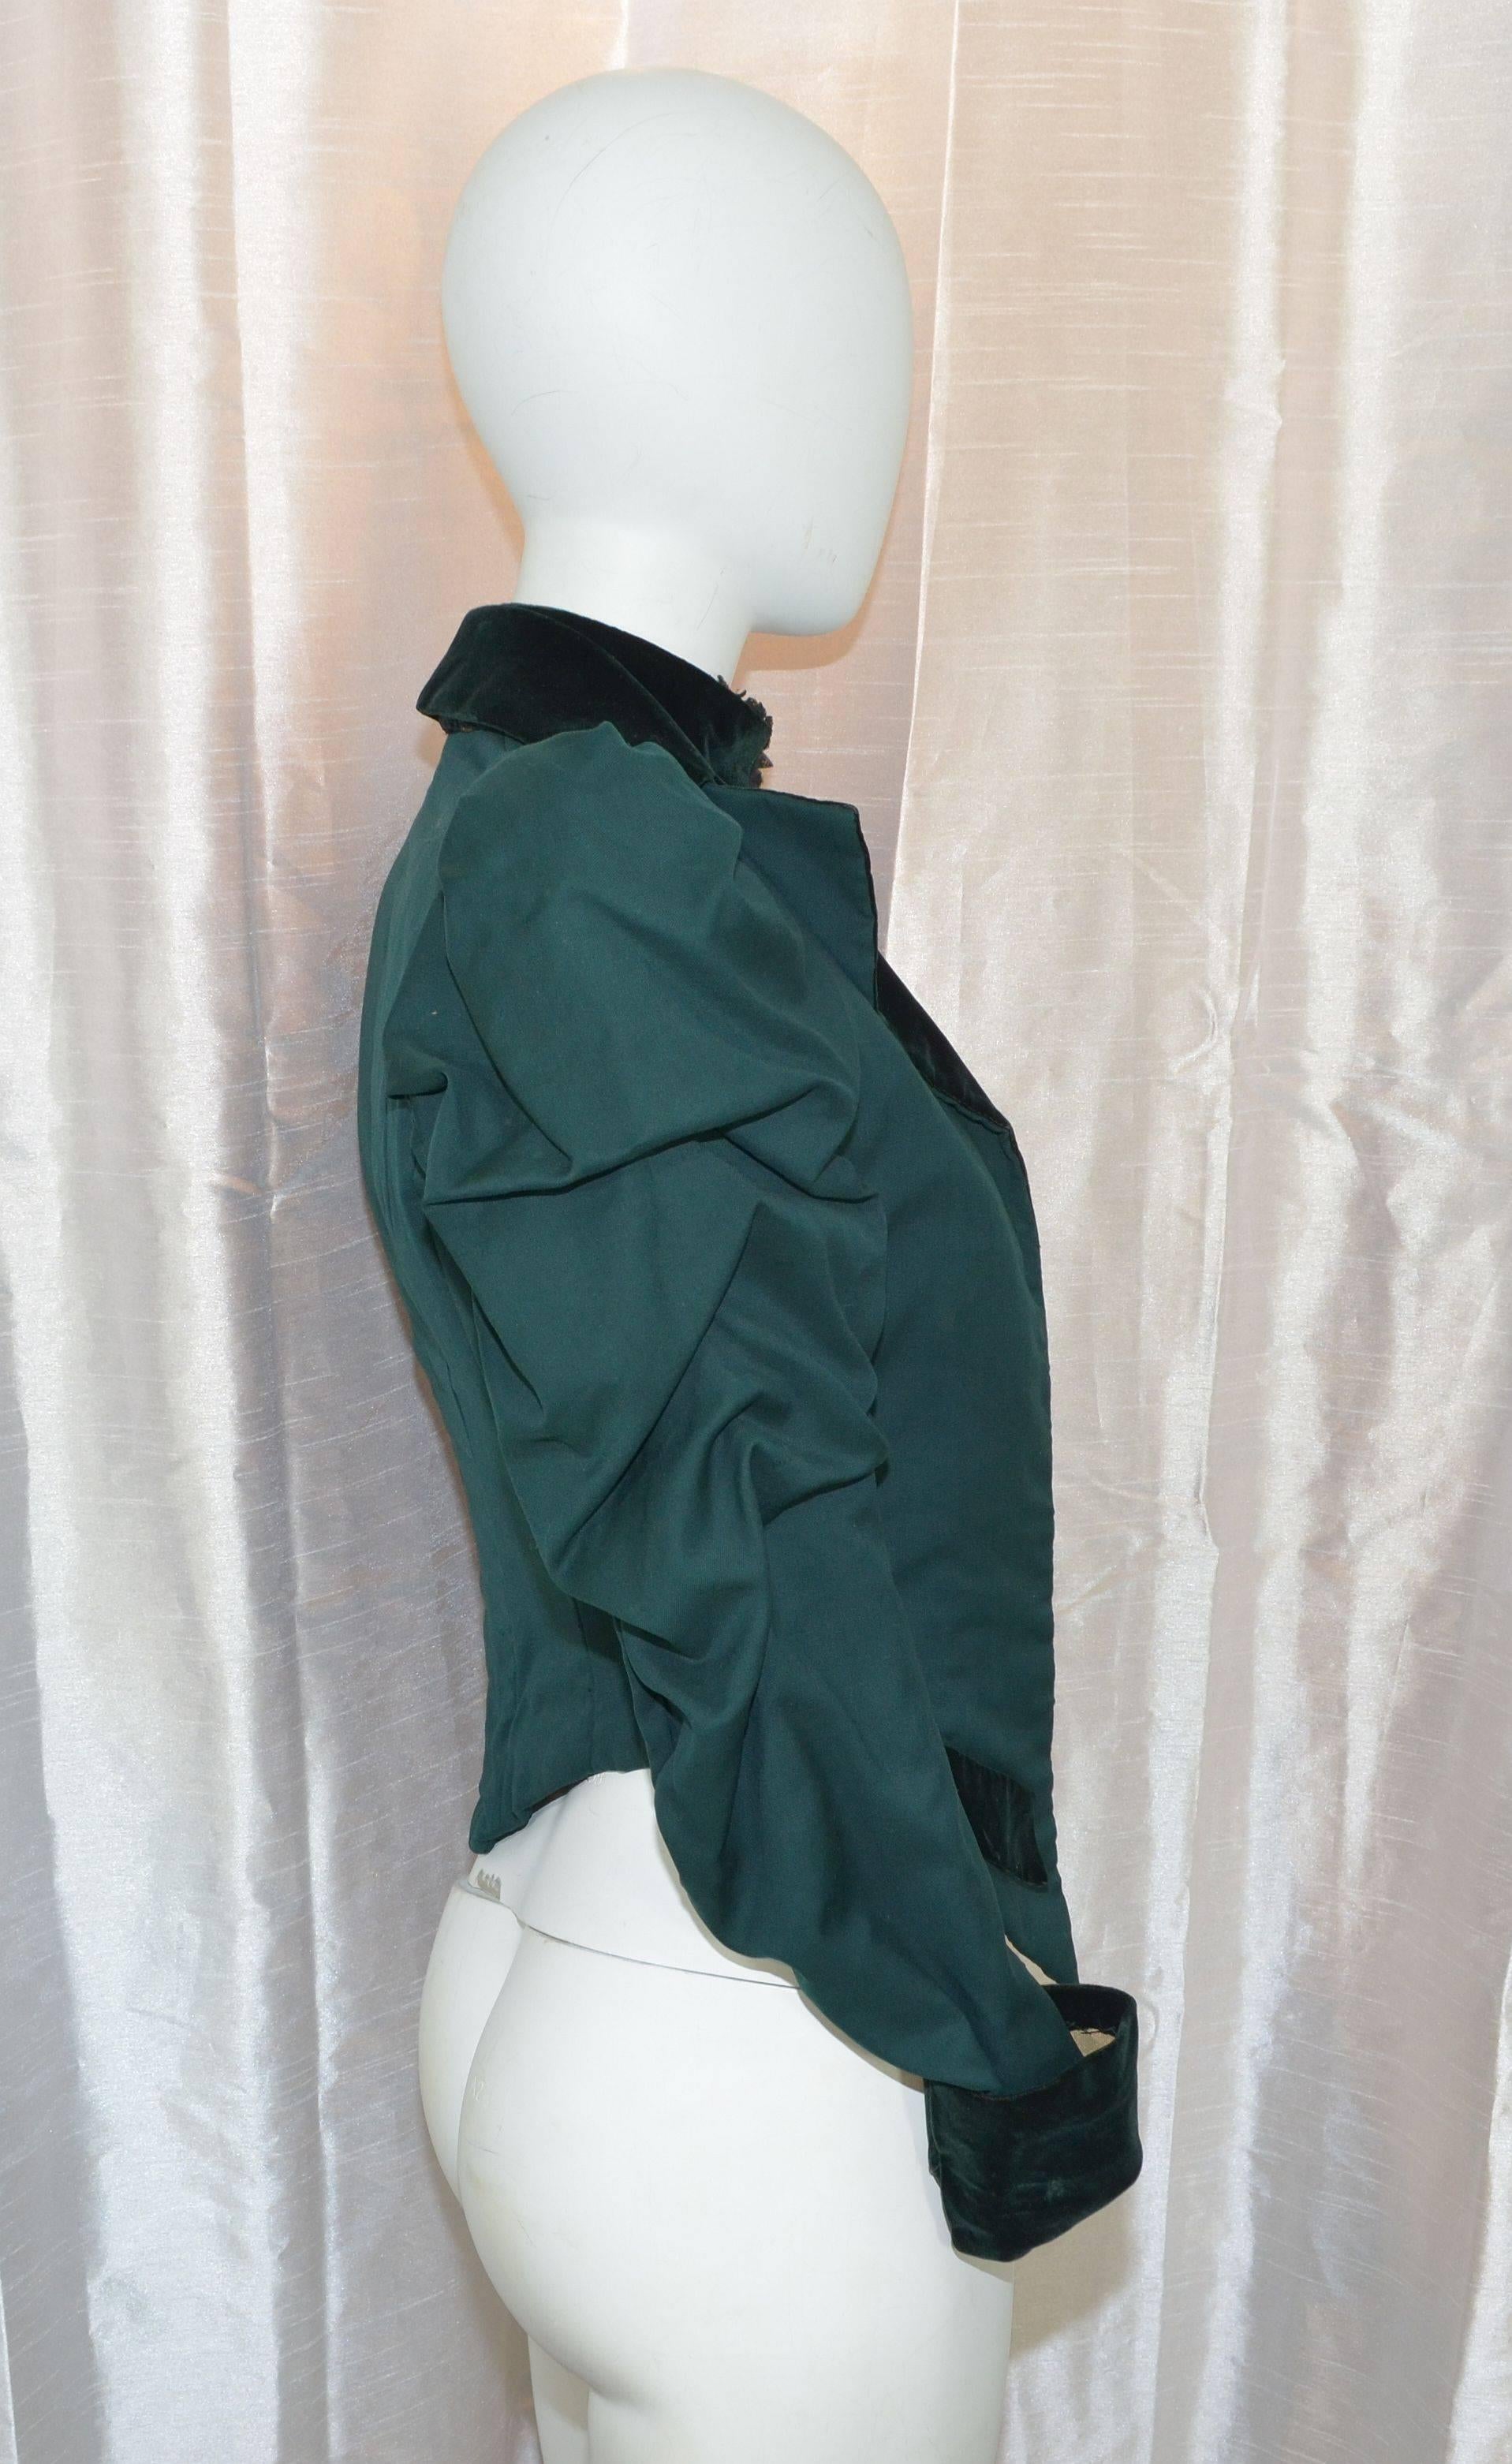 Vintage Victorian jacket featured in deep green with velvet trimmings, hook-and-eye closures along the front as well as hook closures for the built-in corset. Exquisite sleeve detail. Decorative velvet flap pockets at the hem. Would guess this to be